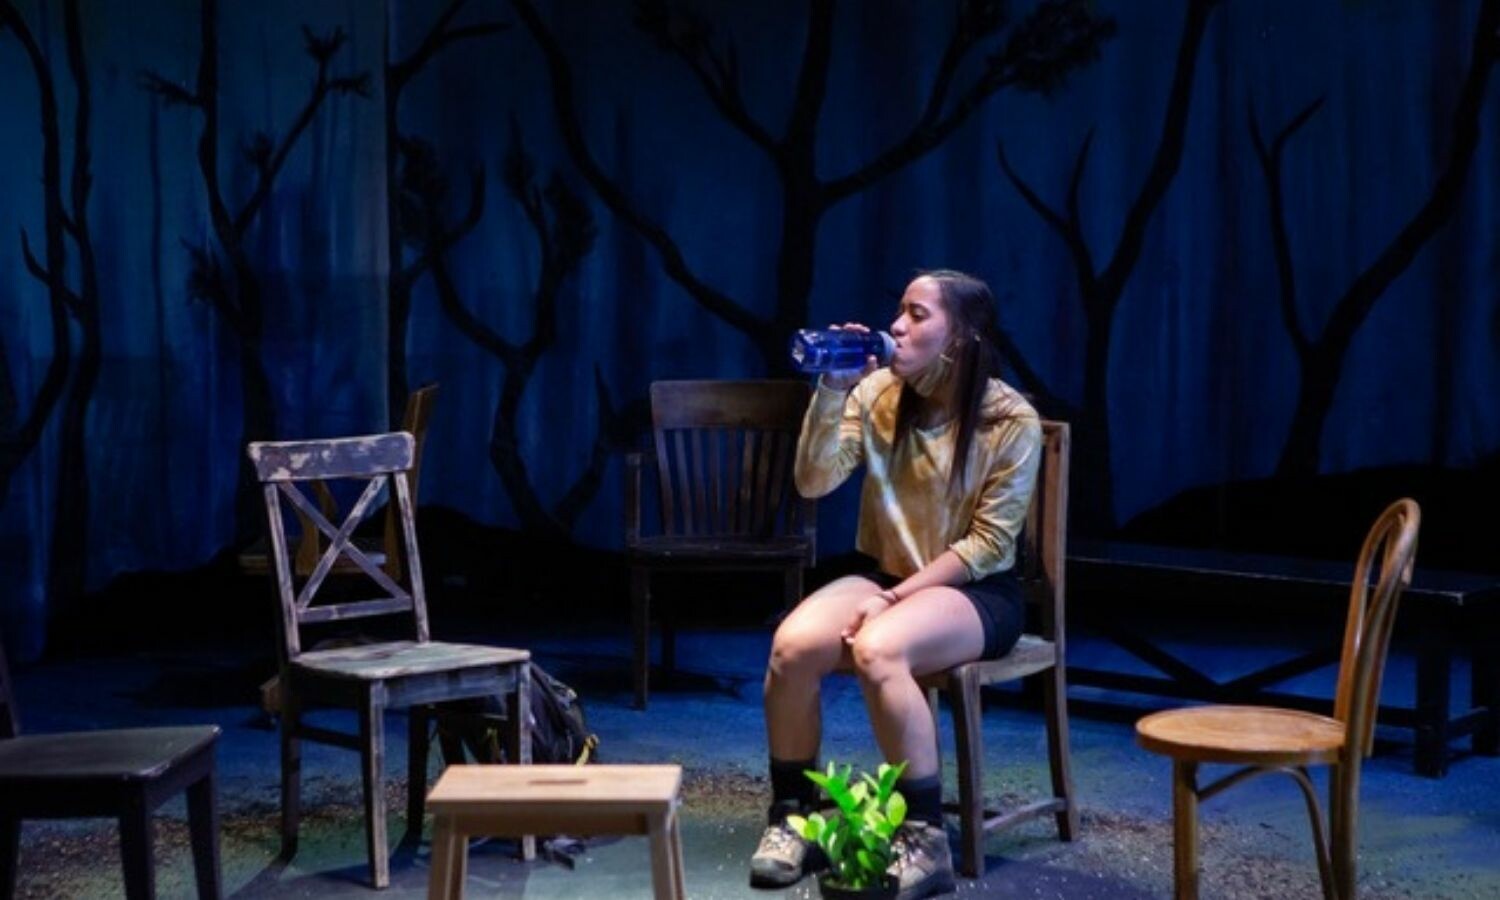 A woman drinking water and sitting down on a chair surrounded by other chairs and onstage "woods".